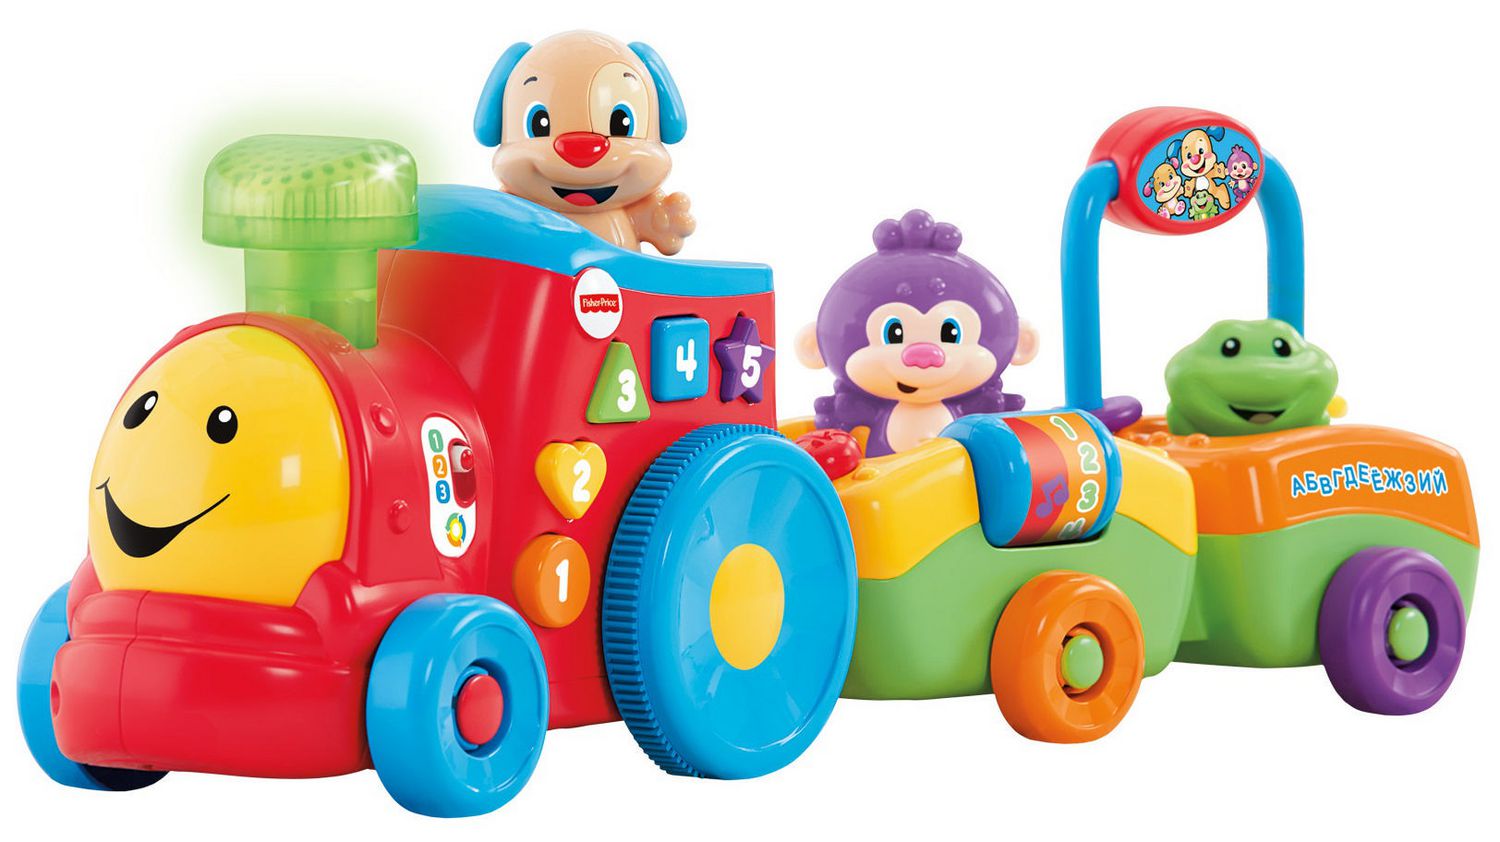 FisherPrice Laugh & Learn Puppy's Smart Stages Train